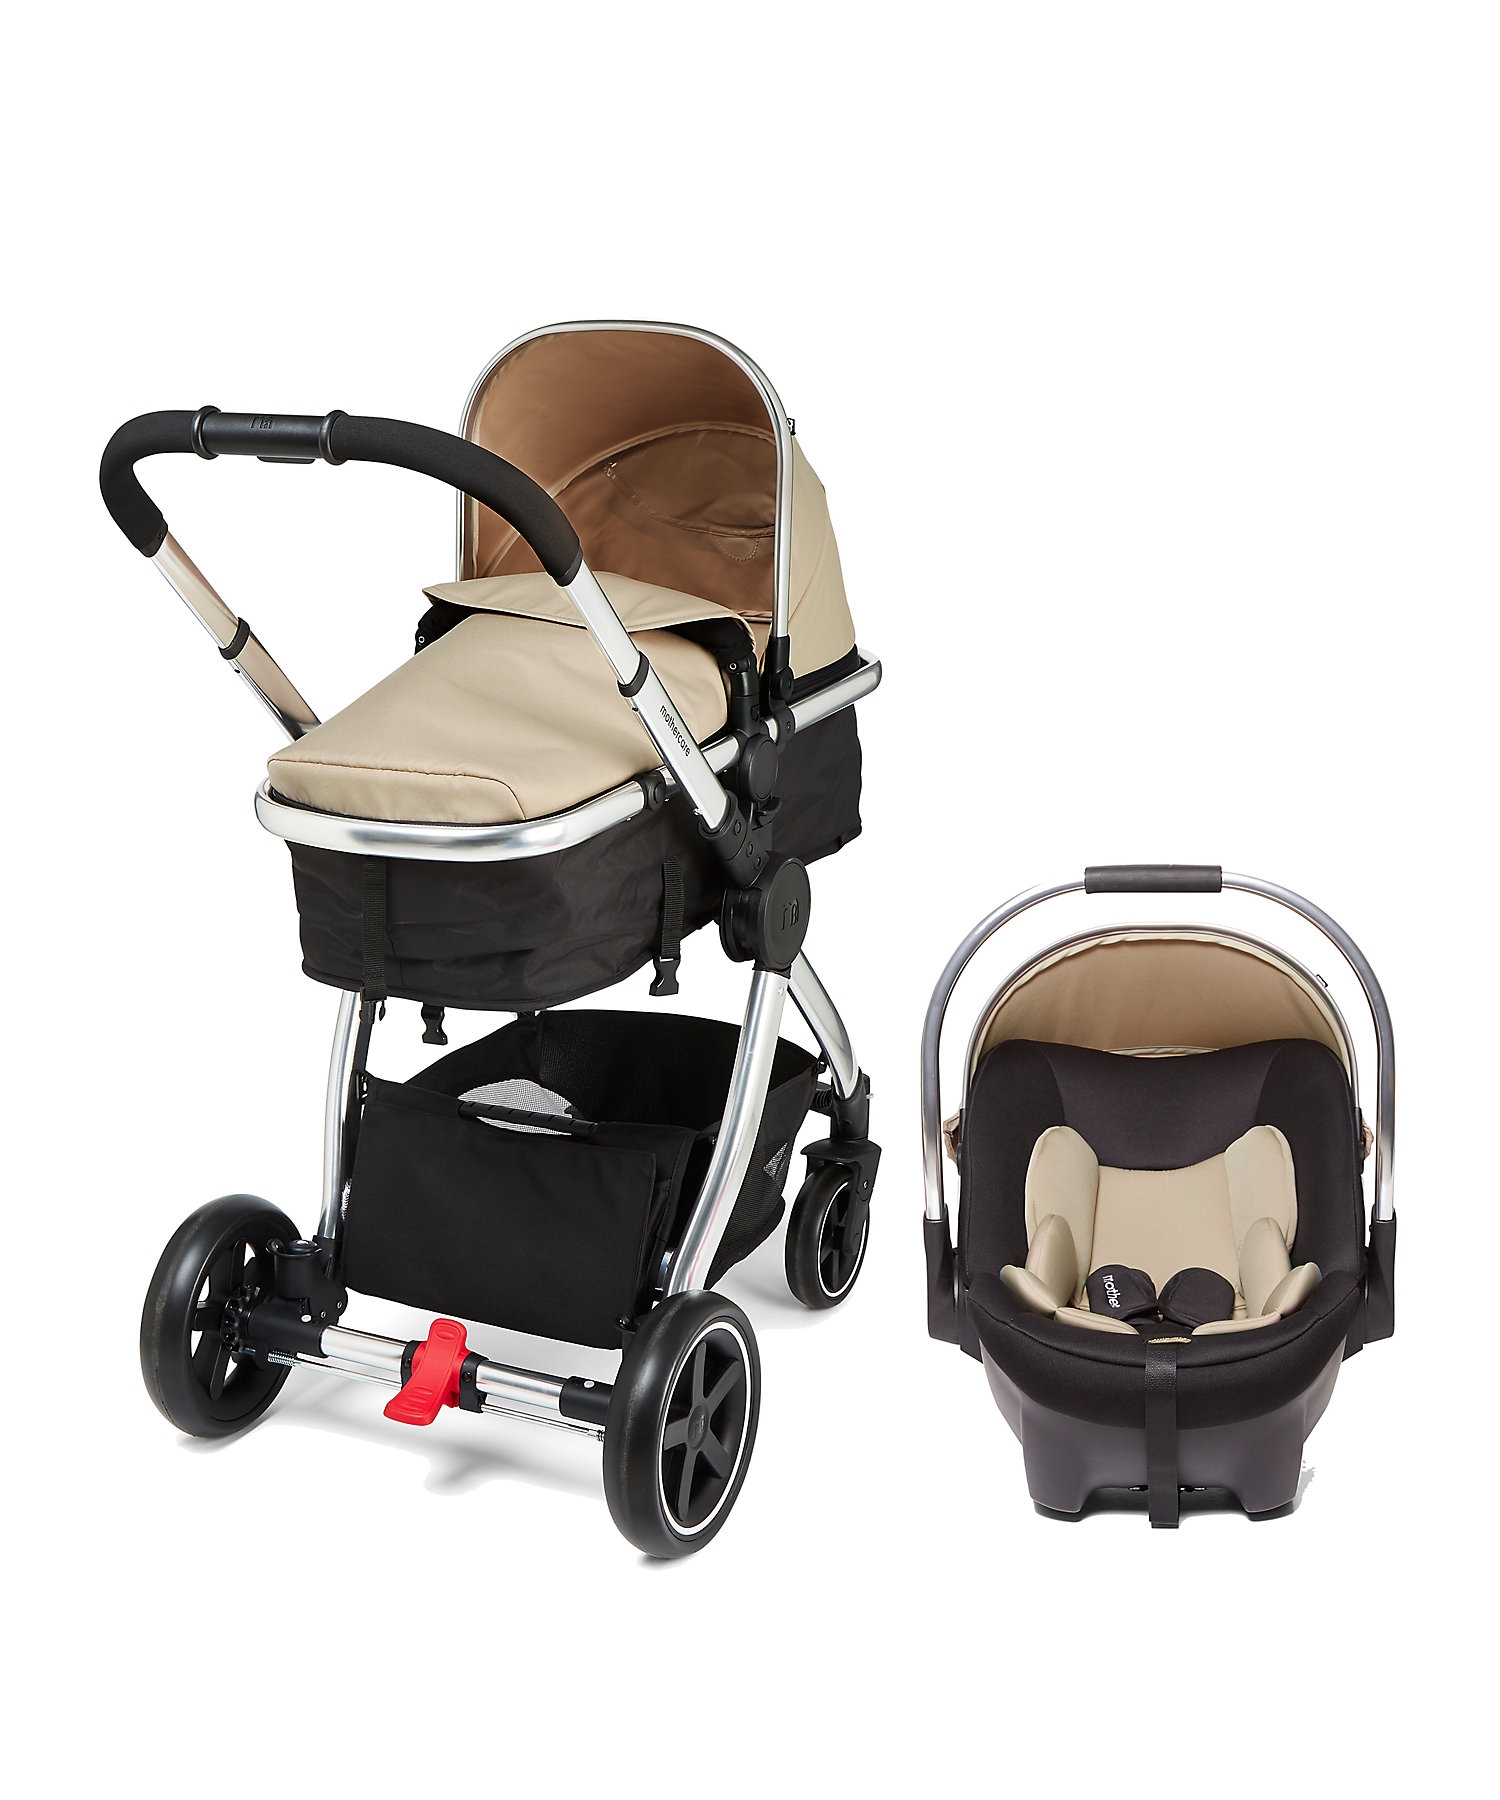 Mothercare | Mothercare PC Journey withLiner Travel System Sand